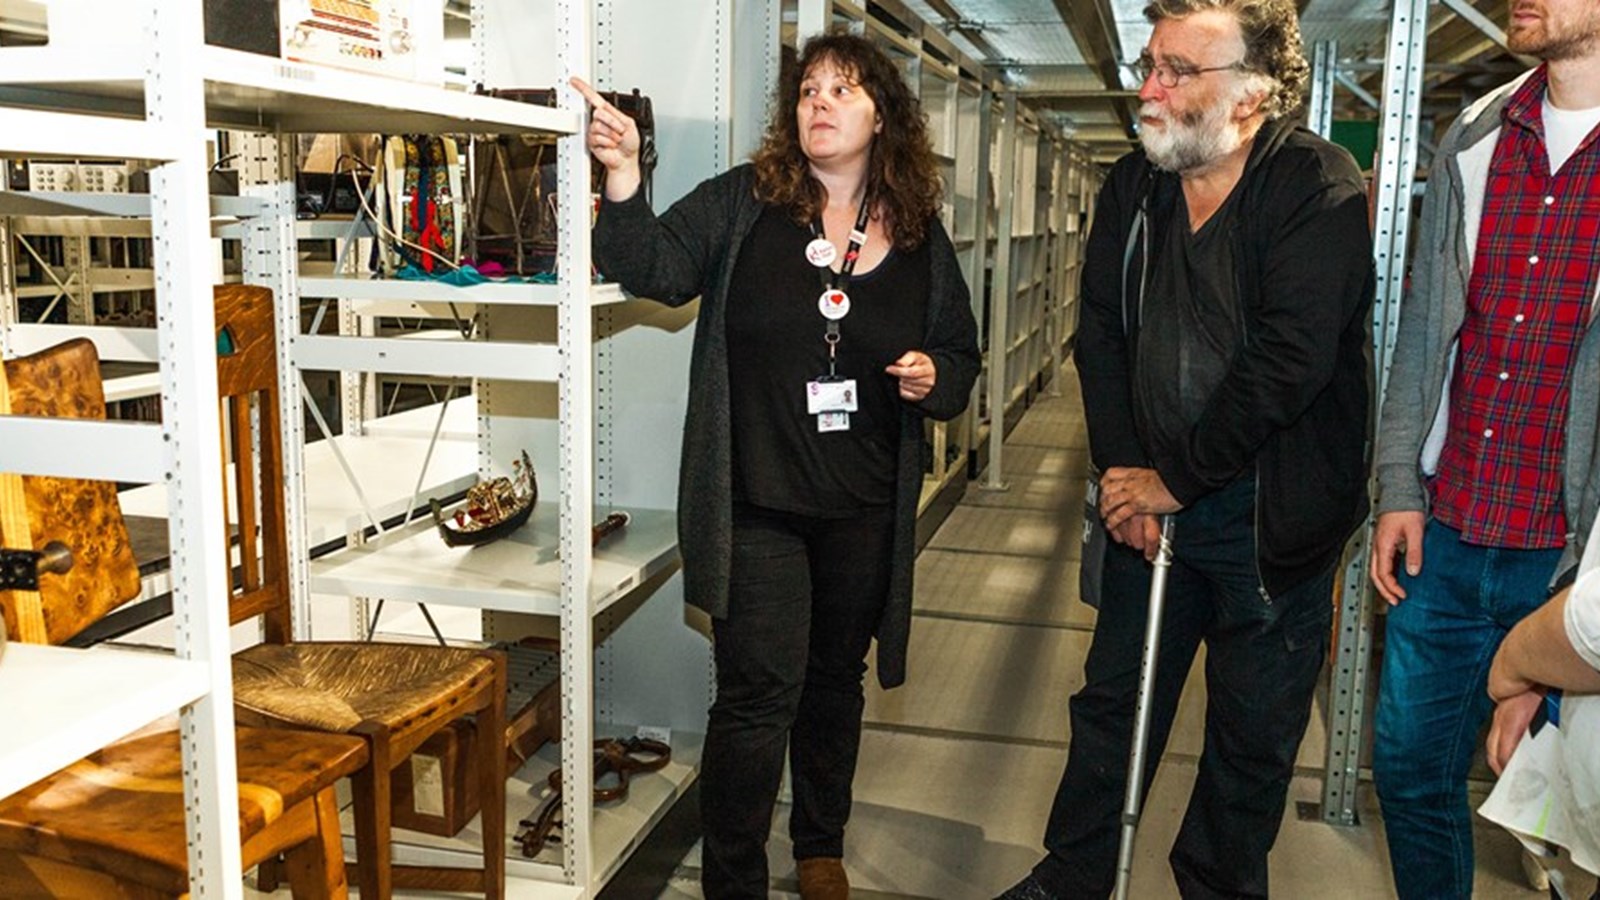 A selection of people looking at some museums collections in a storeroom. They are looking at two chairs and the guide is pointing at the exhibits and speaking to the tour group